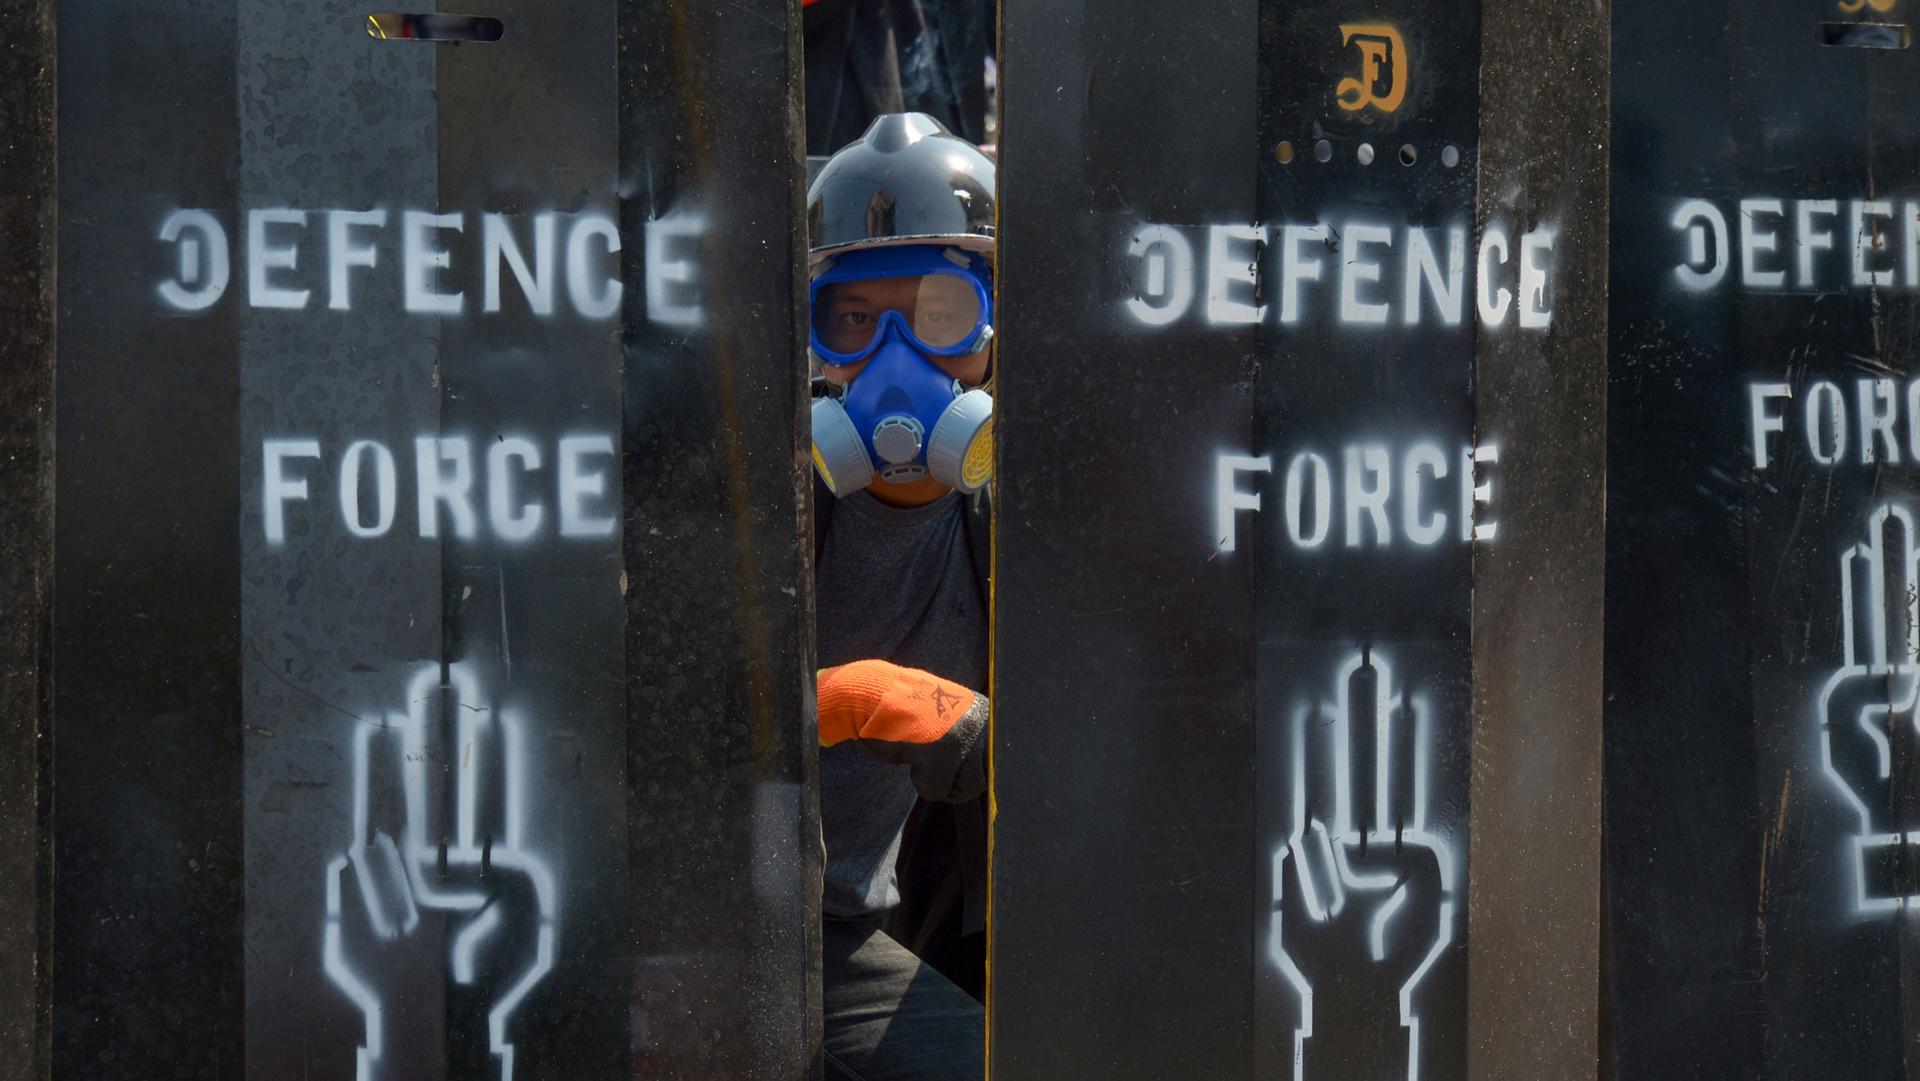 A person wearing an air-filtration mask and helmet is show looking through makeshift metal barriers with the words 'Defense Force' and a hand holding up three fingers painted on them.